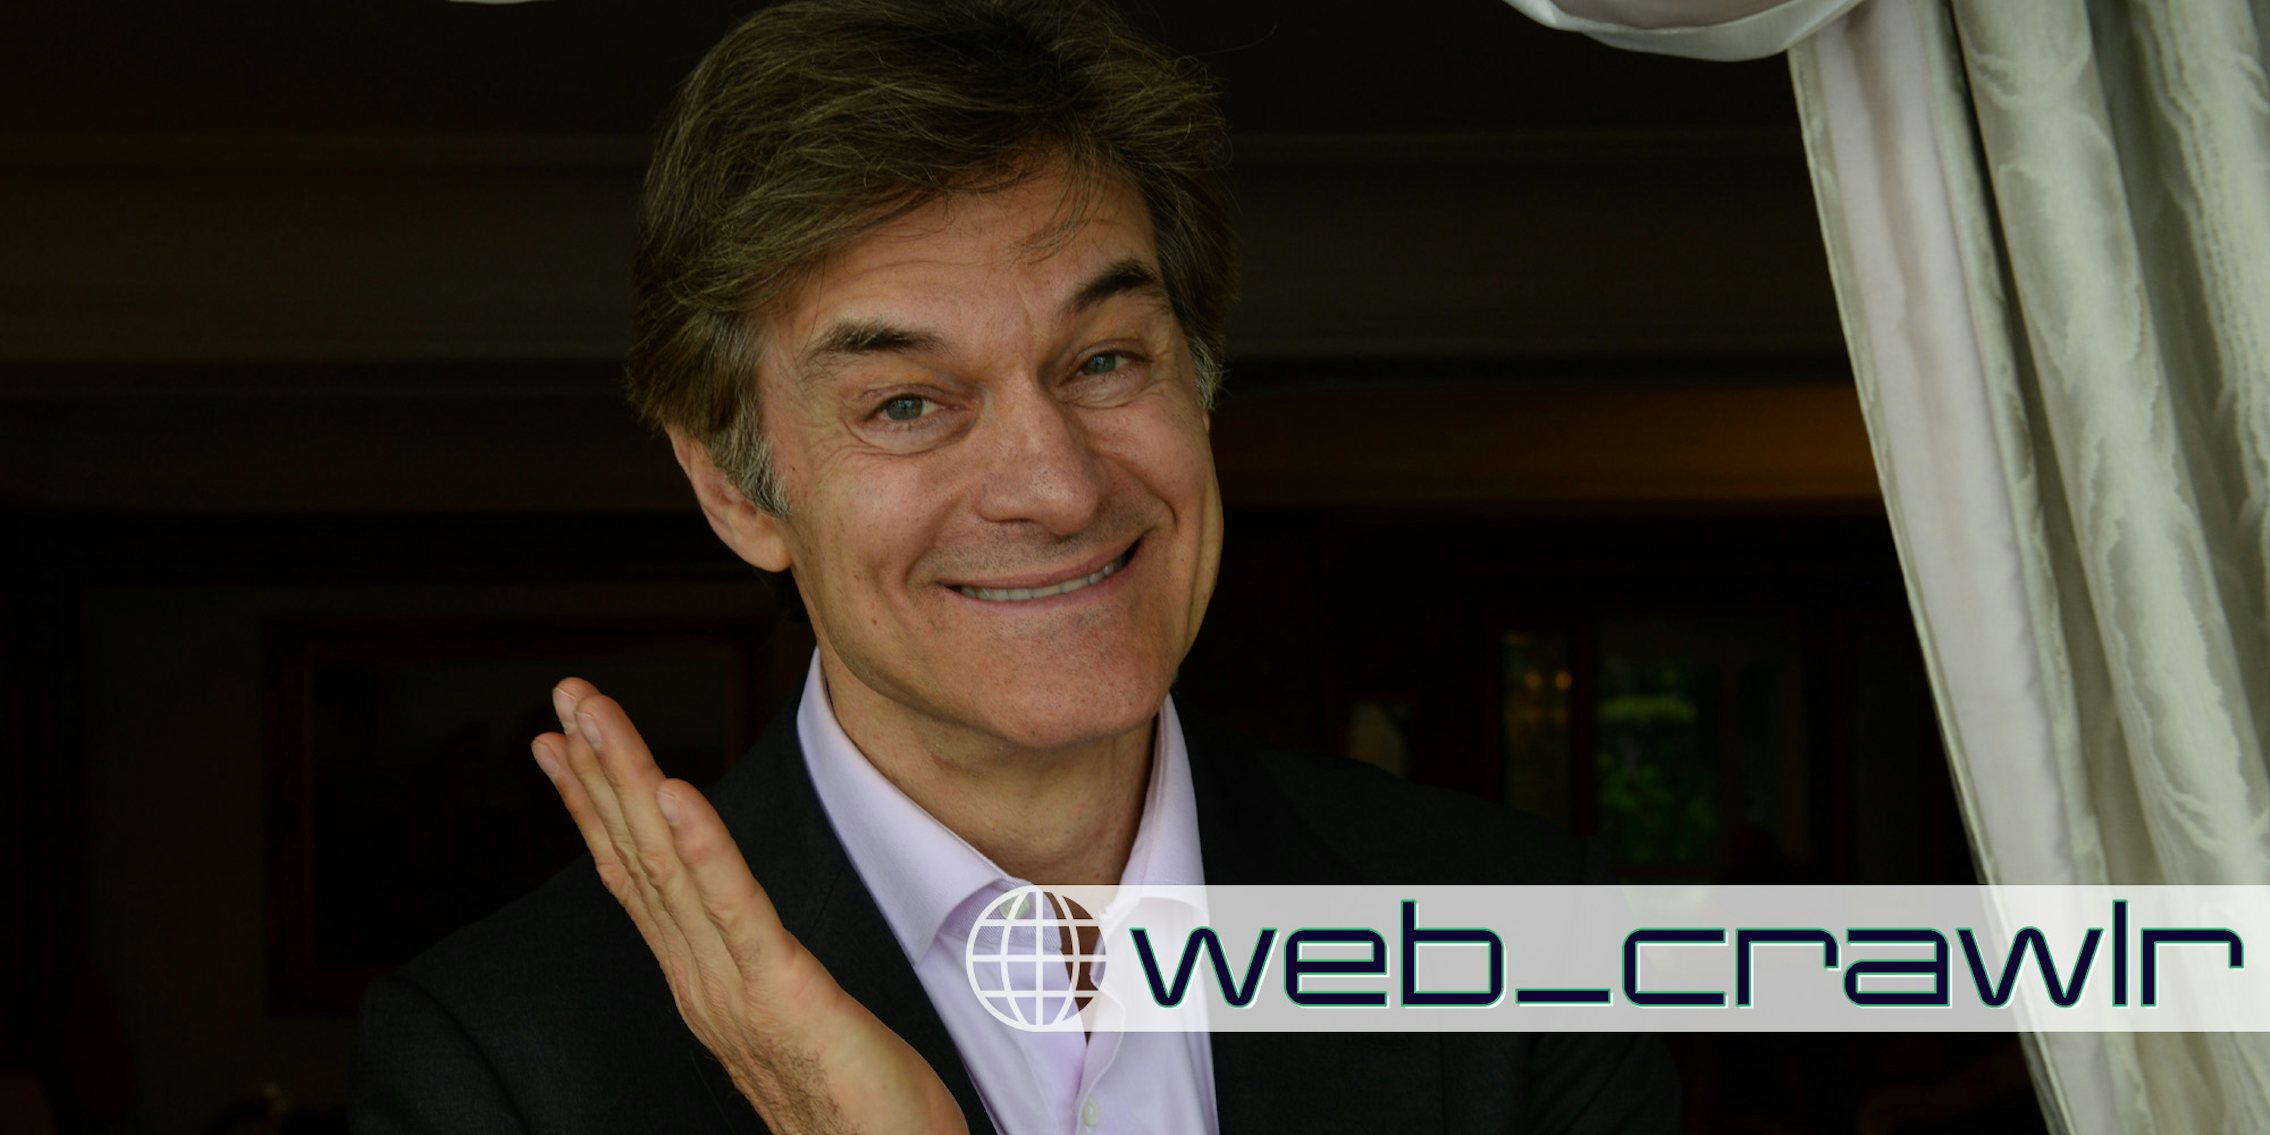 Dr. Oz smiling. The Daily Dot newsletter web_crawlr logo is in the bottom right corner.